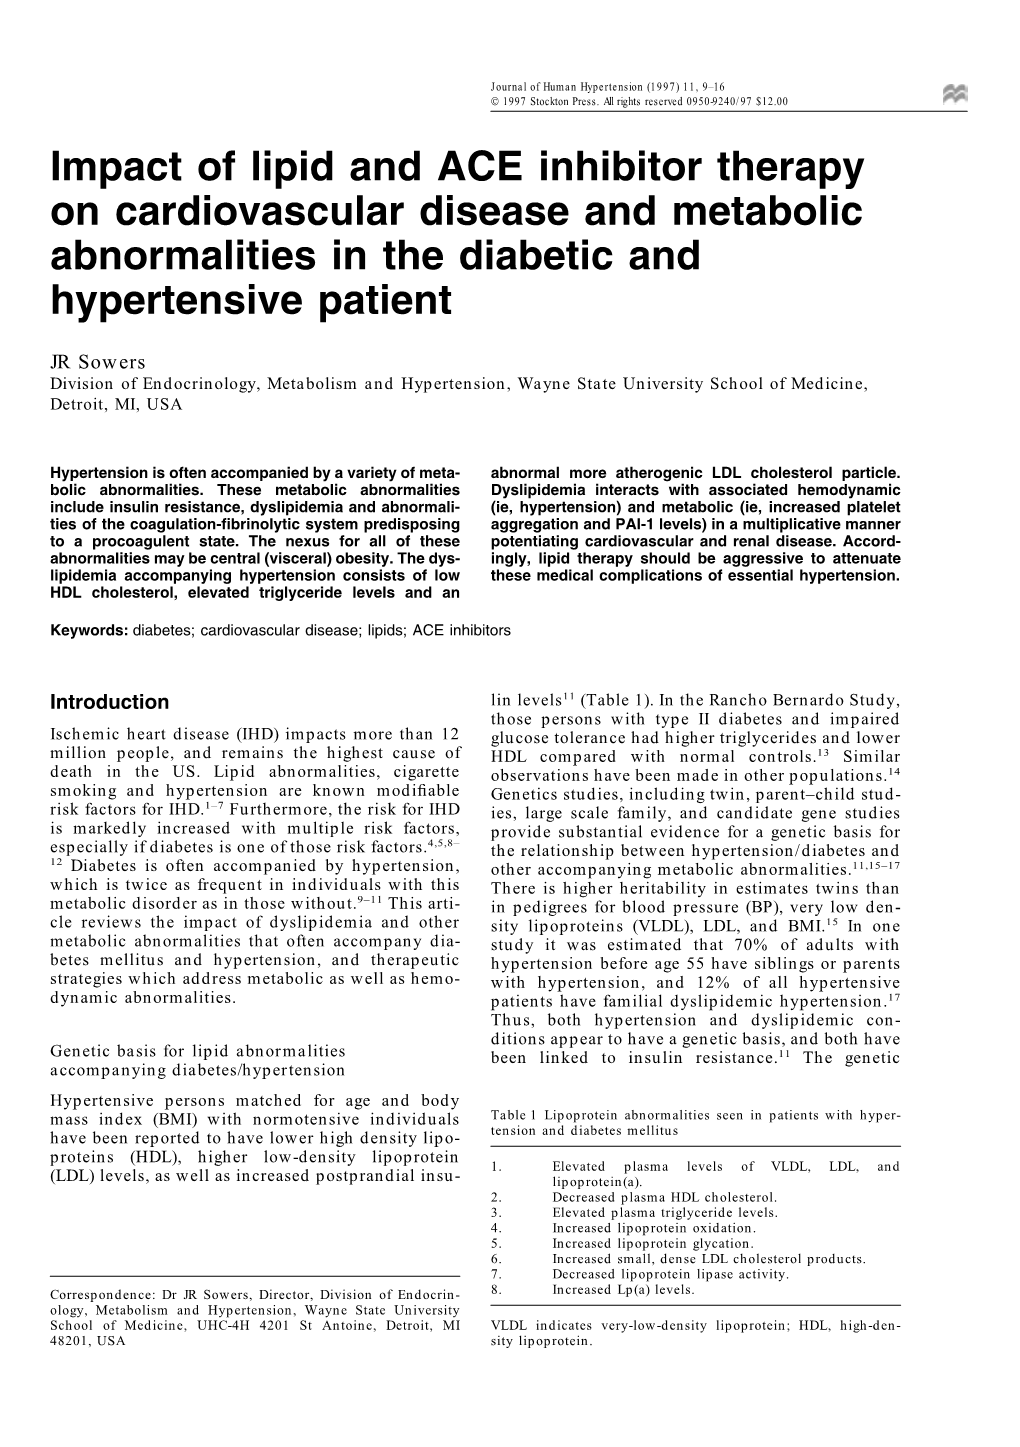 Impact of Lipid and ACE Inhibitor Therapy on Cardiovascular Disease and Metabolic Abnormalities in the Diabetic and Hypertensive Patient